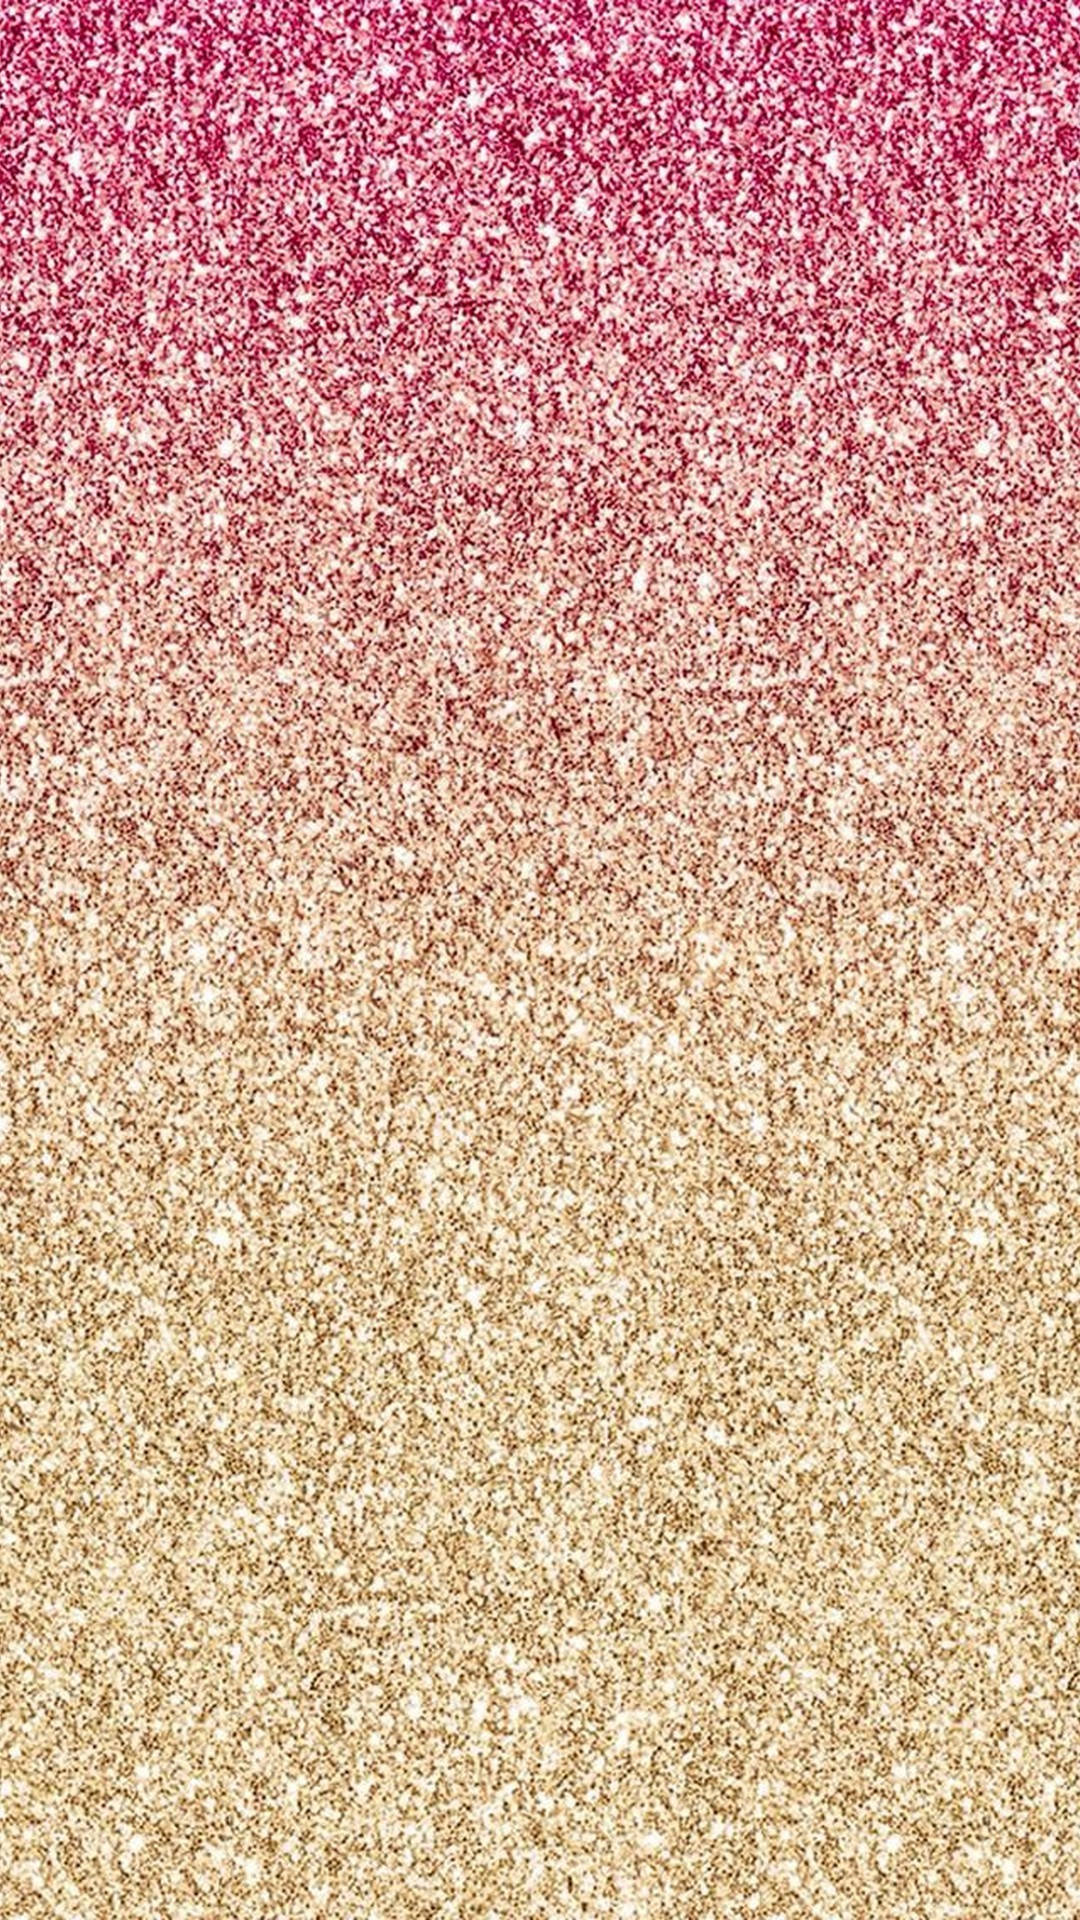 Pink And Gold Glitter Girly Iphone